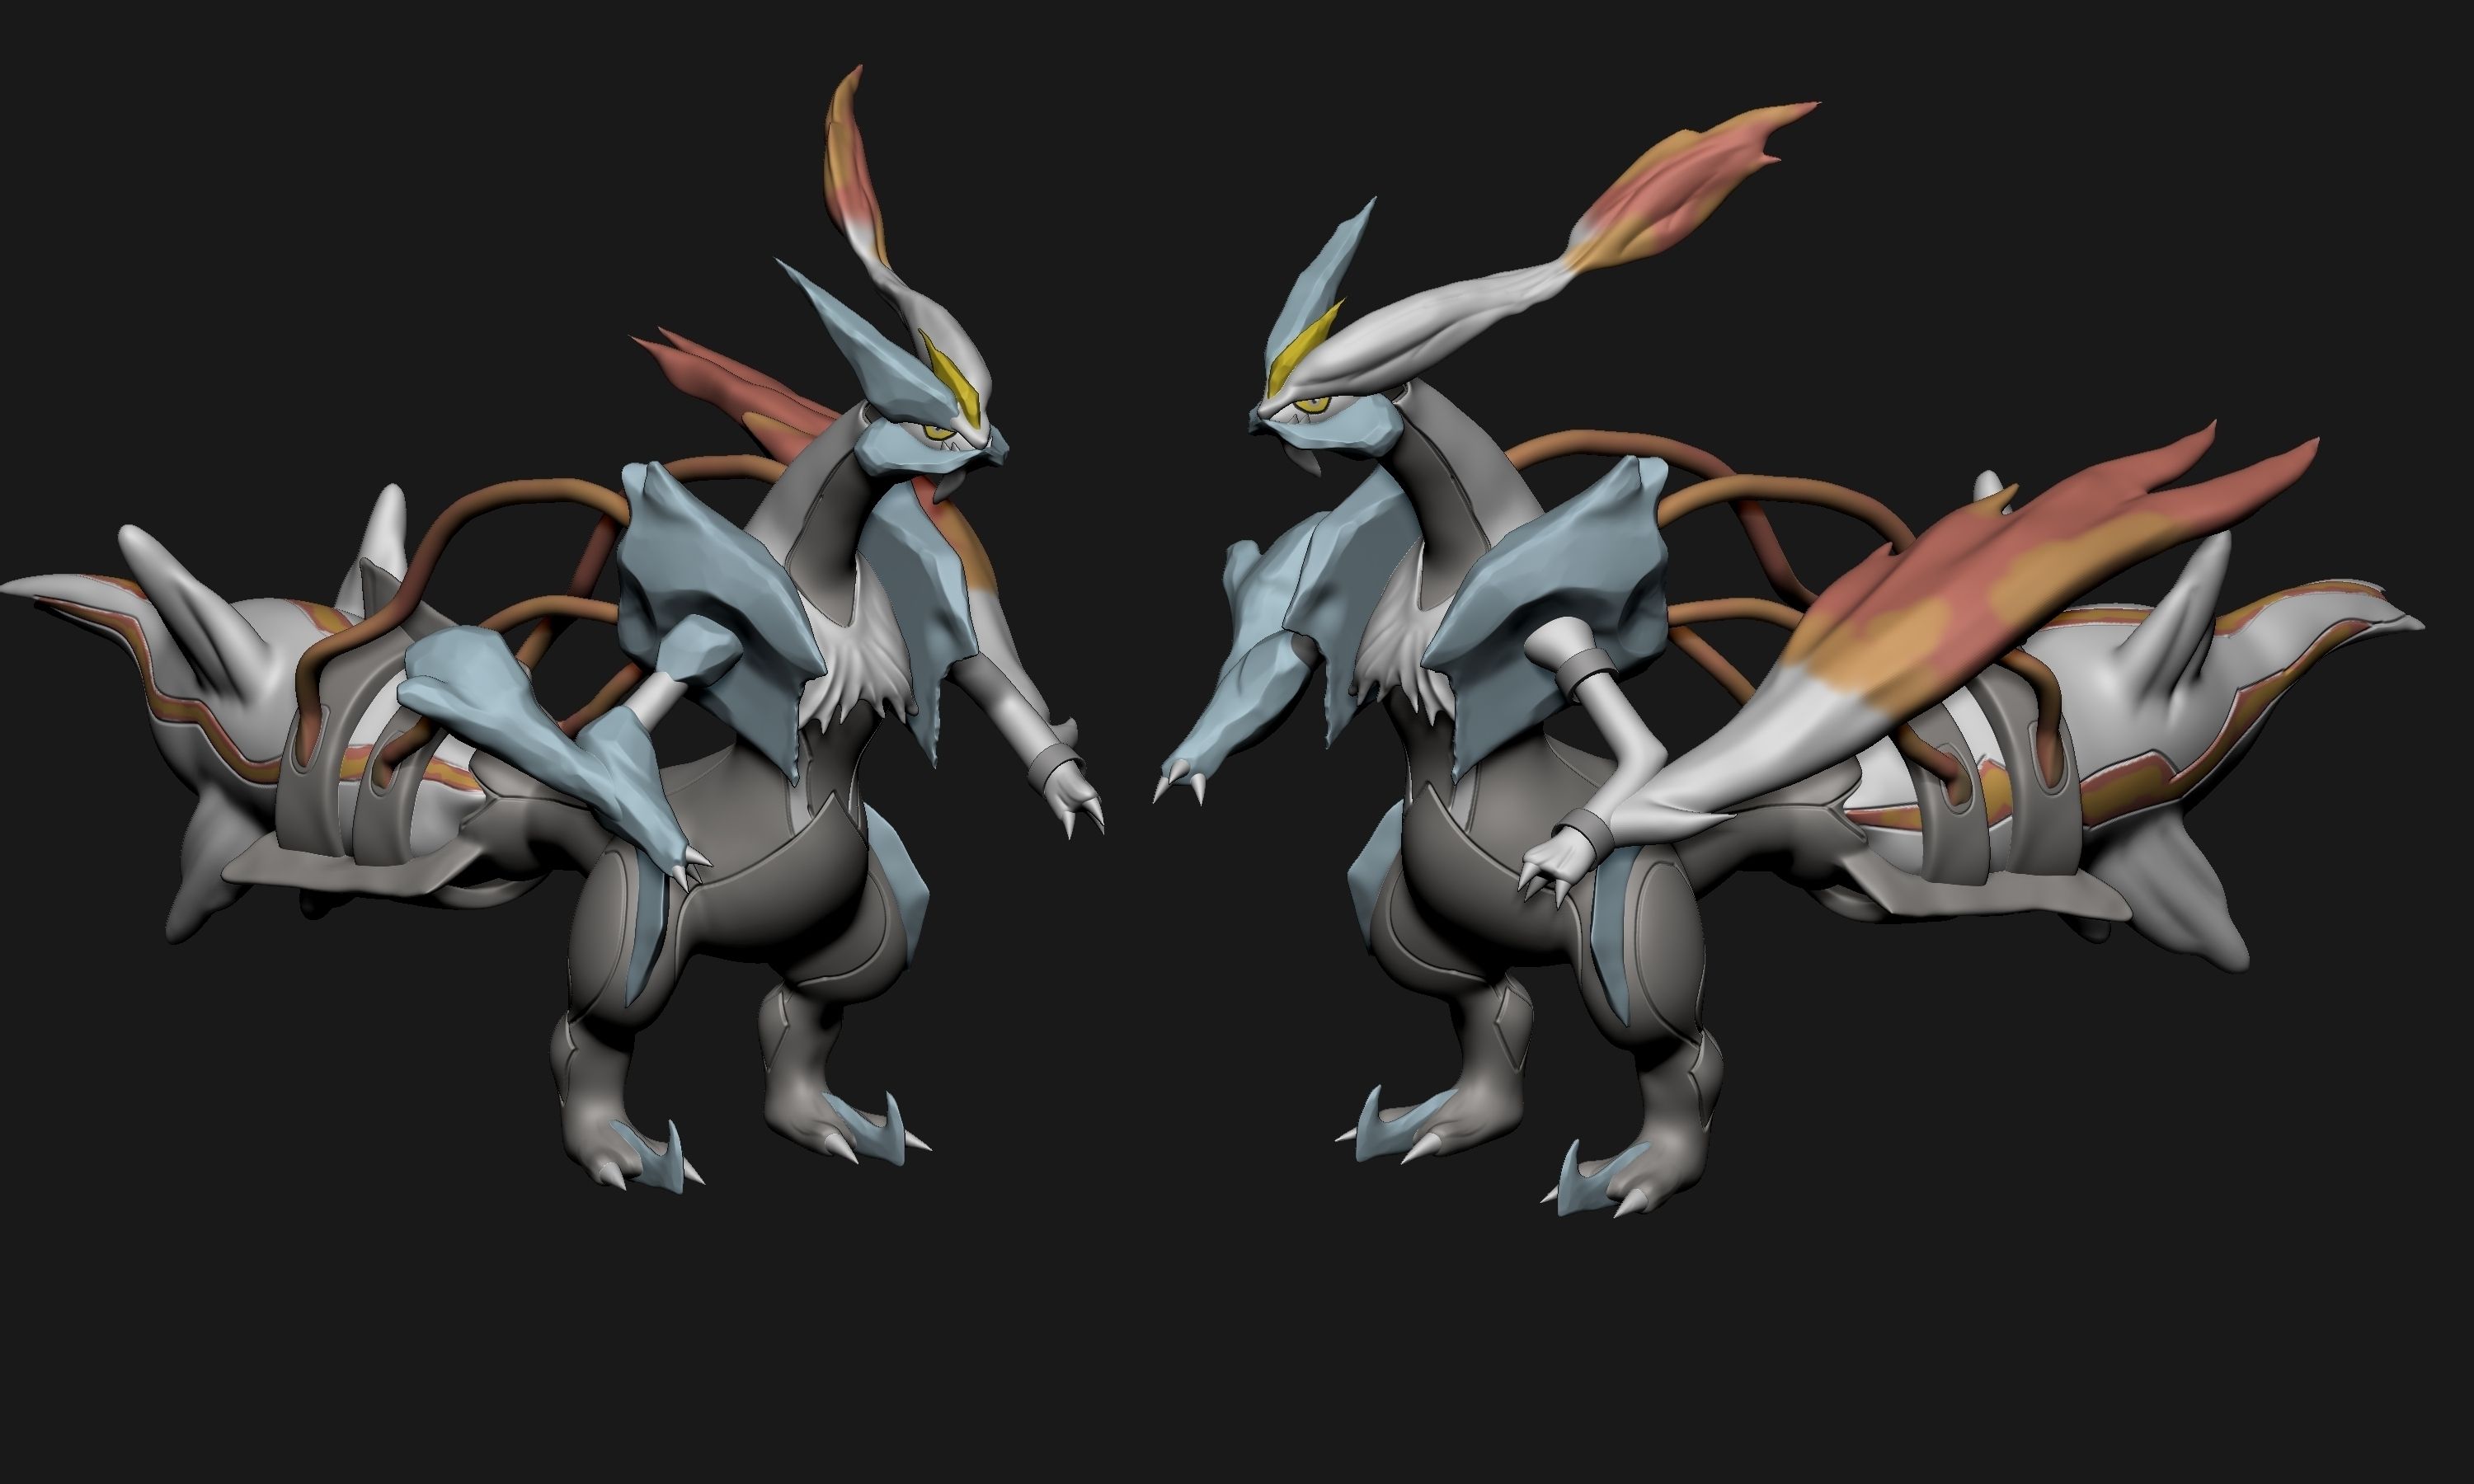 white-kyurem-alter-2.jpg Download OBJ file Pokemon - White Kyurem(with cuts and as a whole)(2 versions) • 3D printer template, ErickFontoura3D